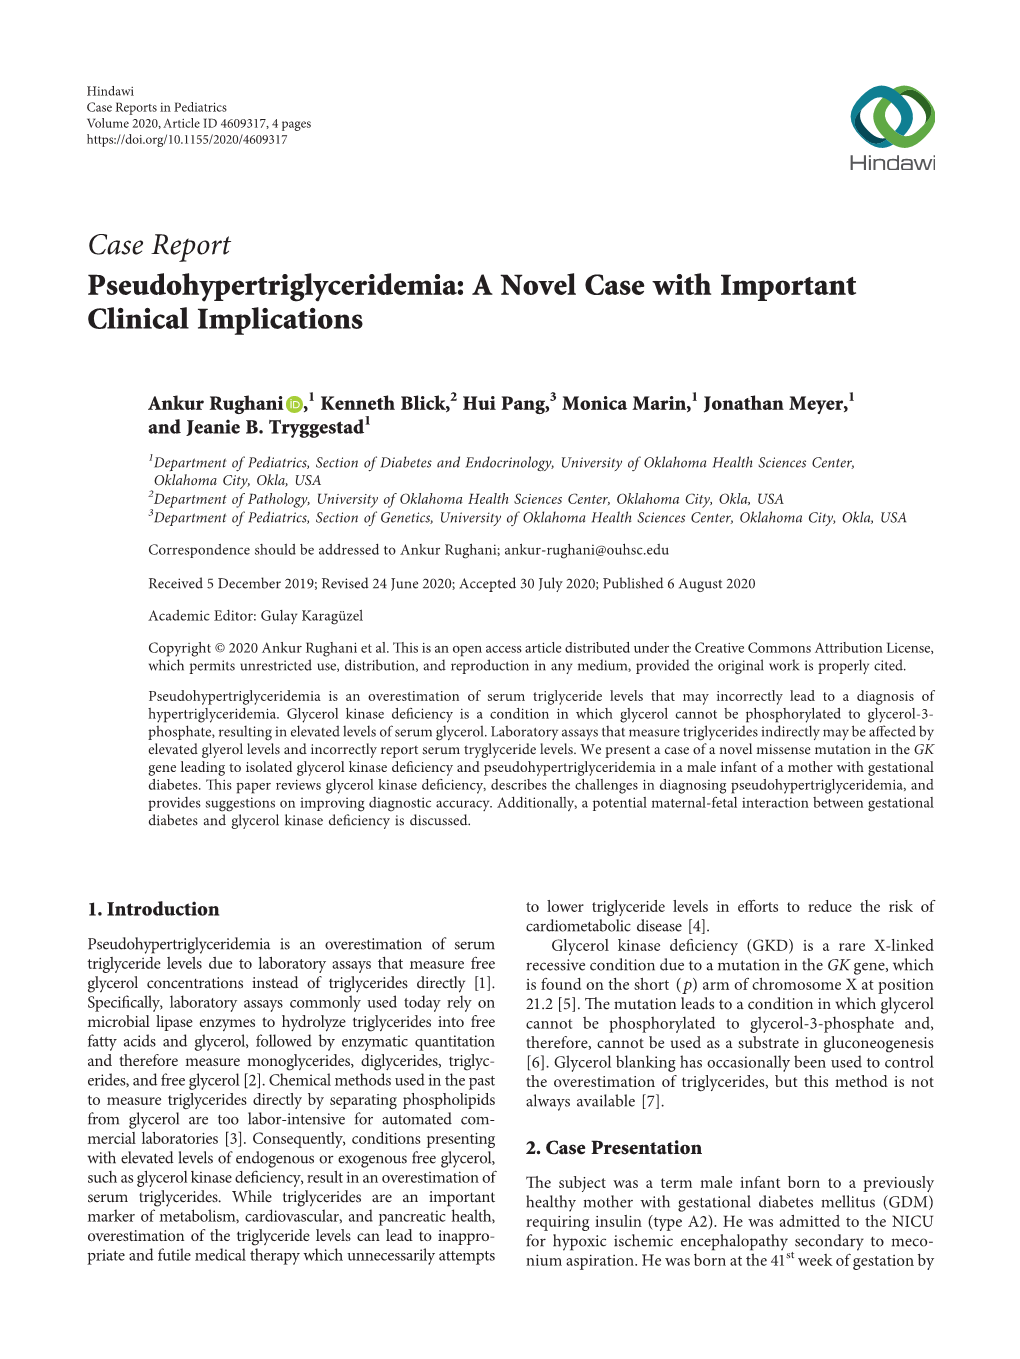 Pseudohypertriglyceridemia: a Novel Case with Important Clinical Implications